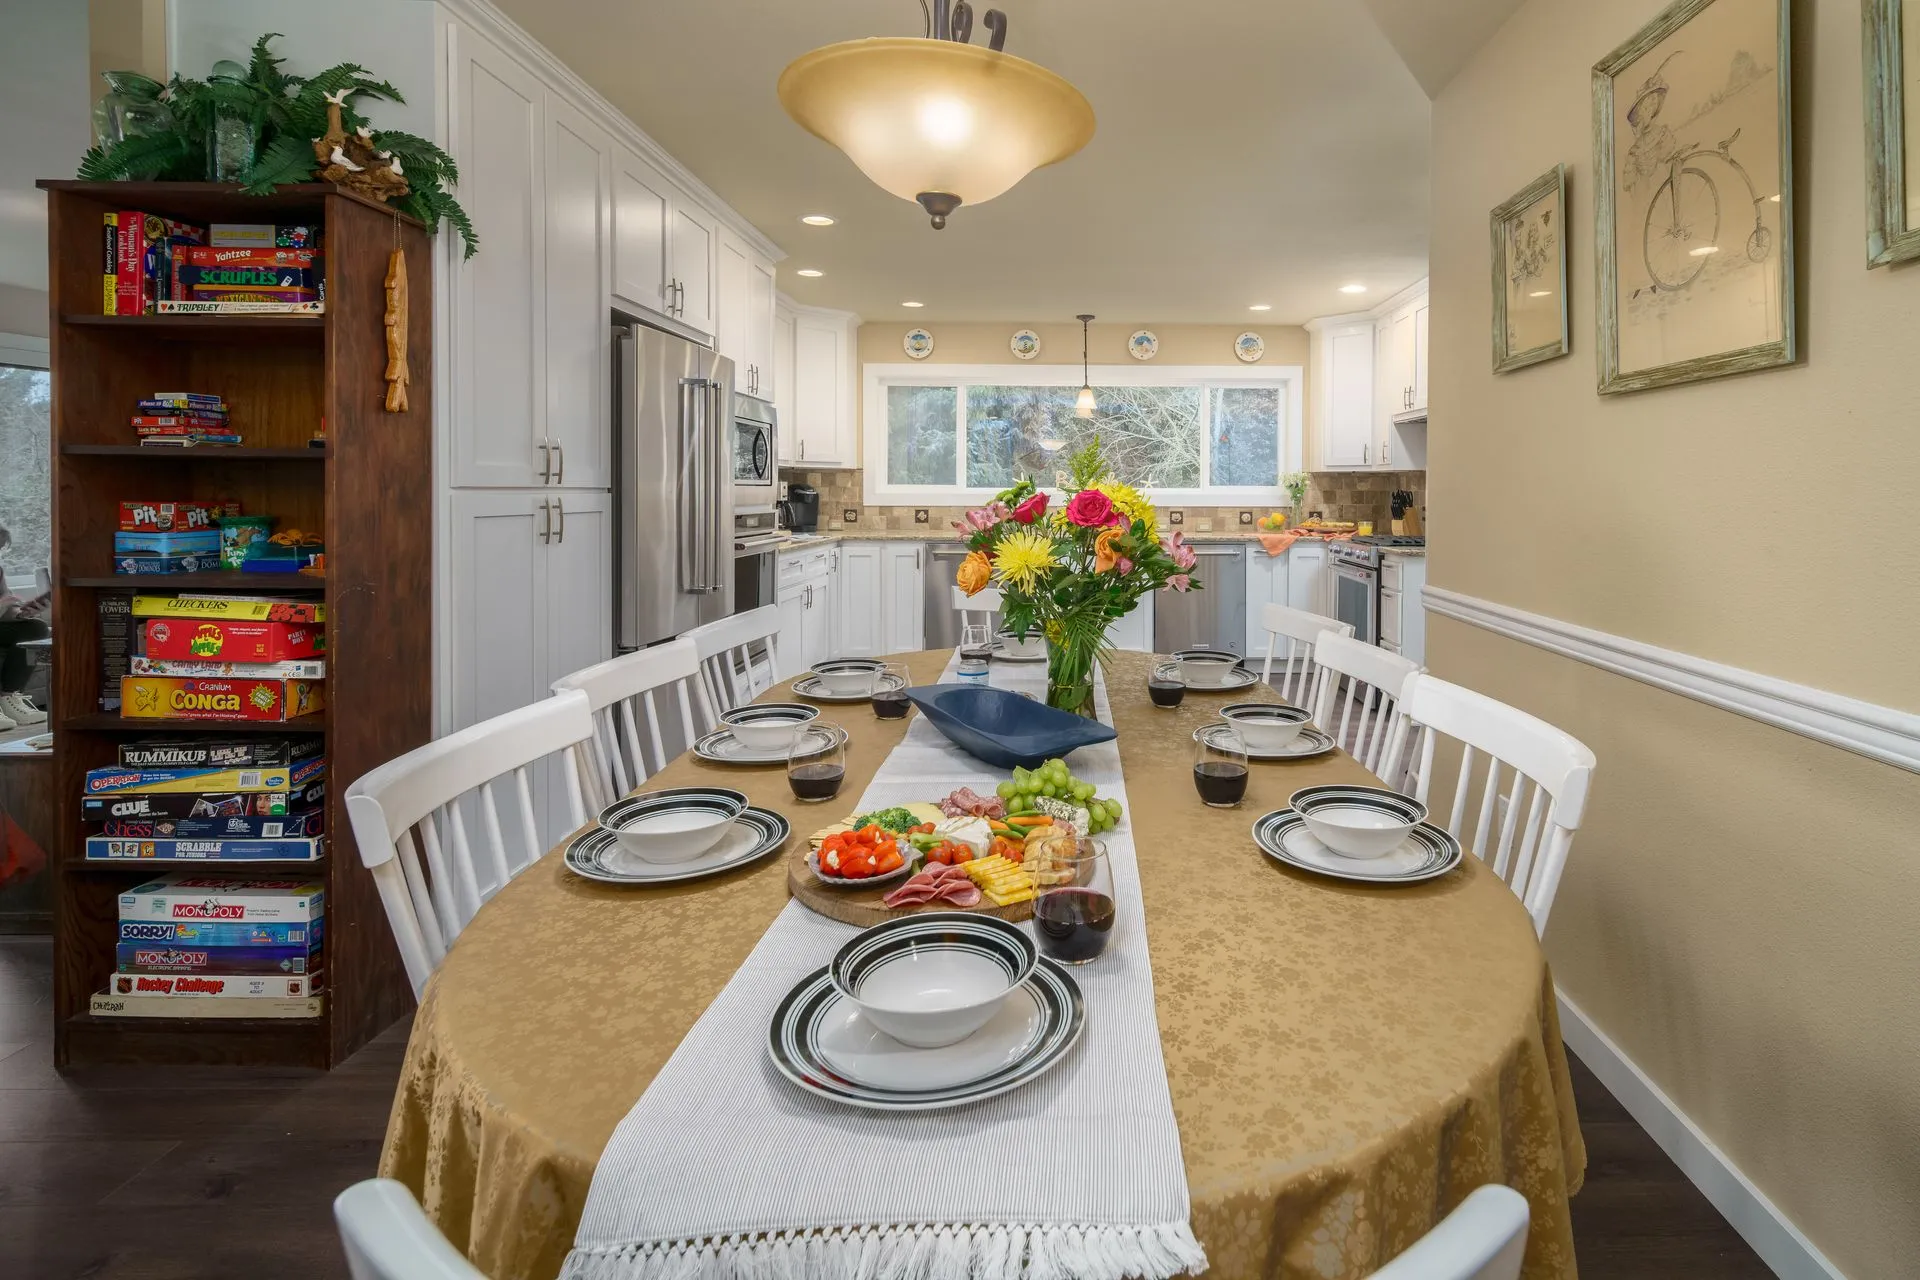 Vacation Rental in Cannon Beach, Anchor's Retreat kitchen with board games, large dining table and appliances